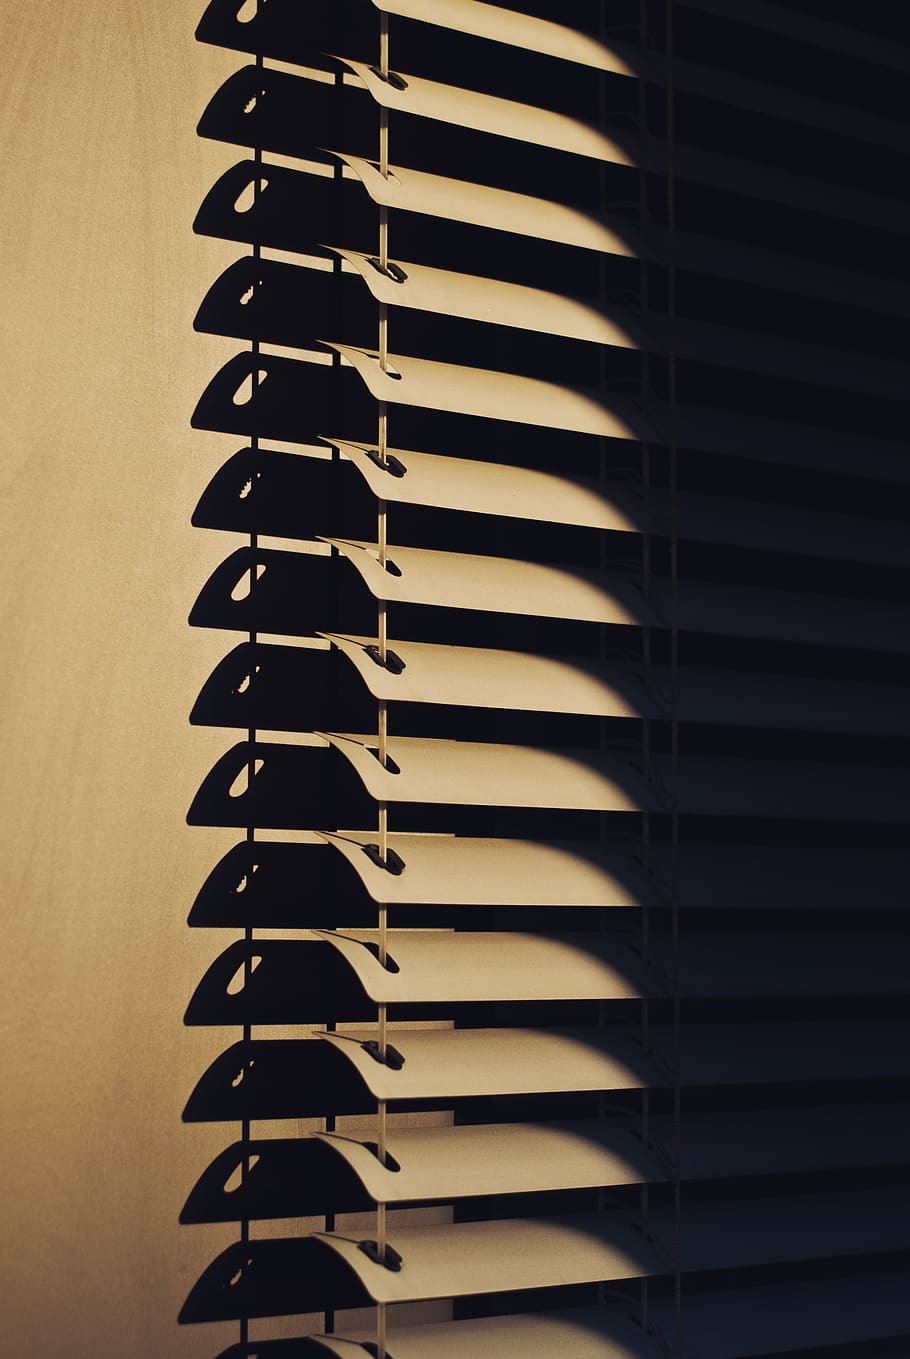 blinds, window, shade, pattern, no people, indoors, close-up